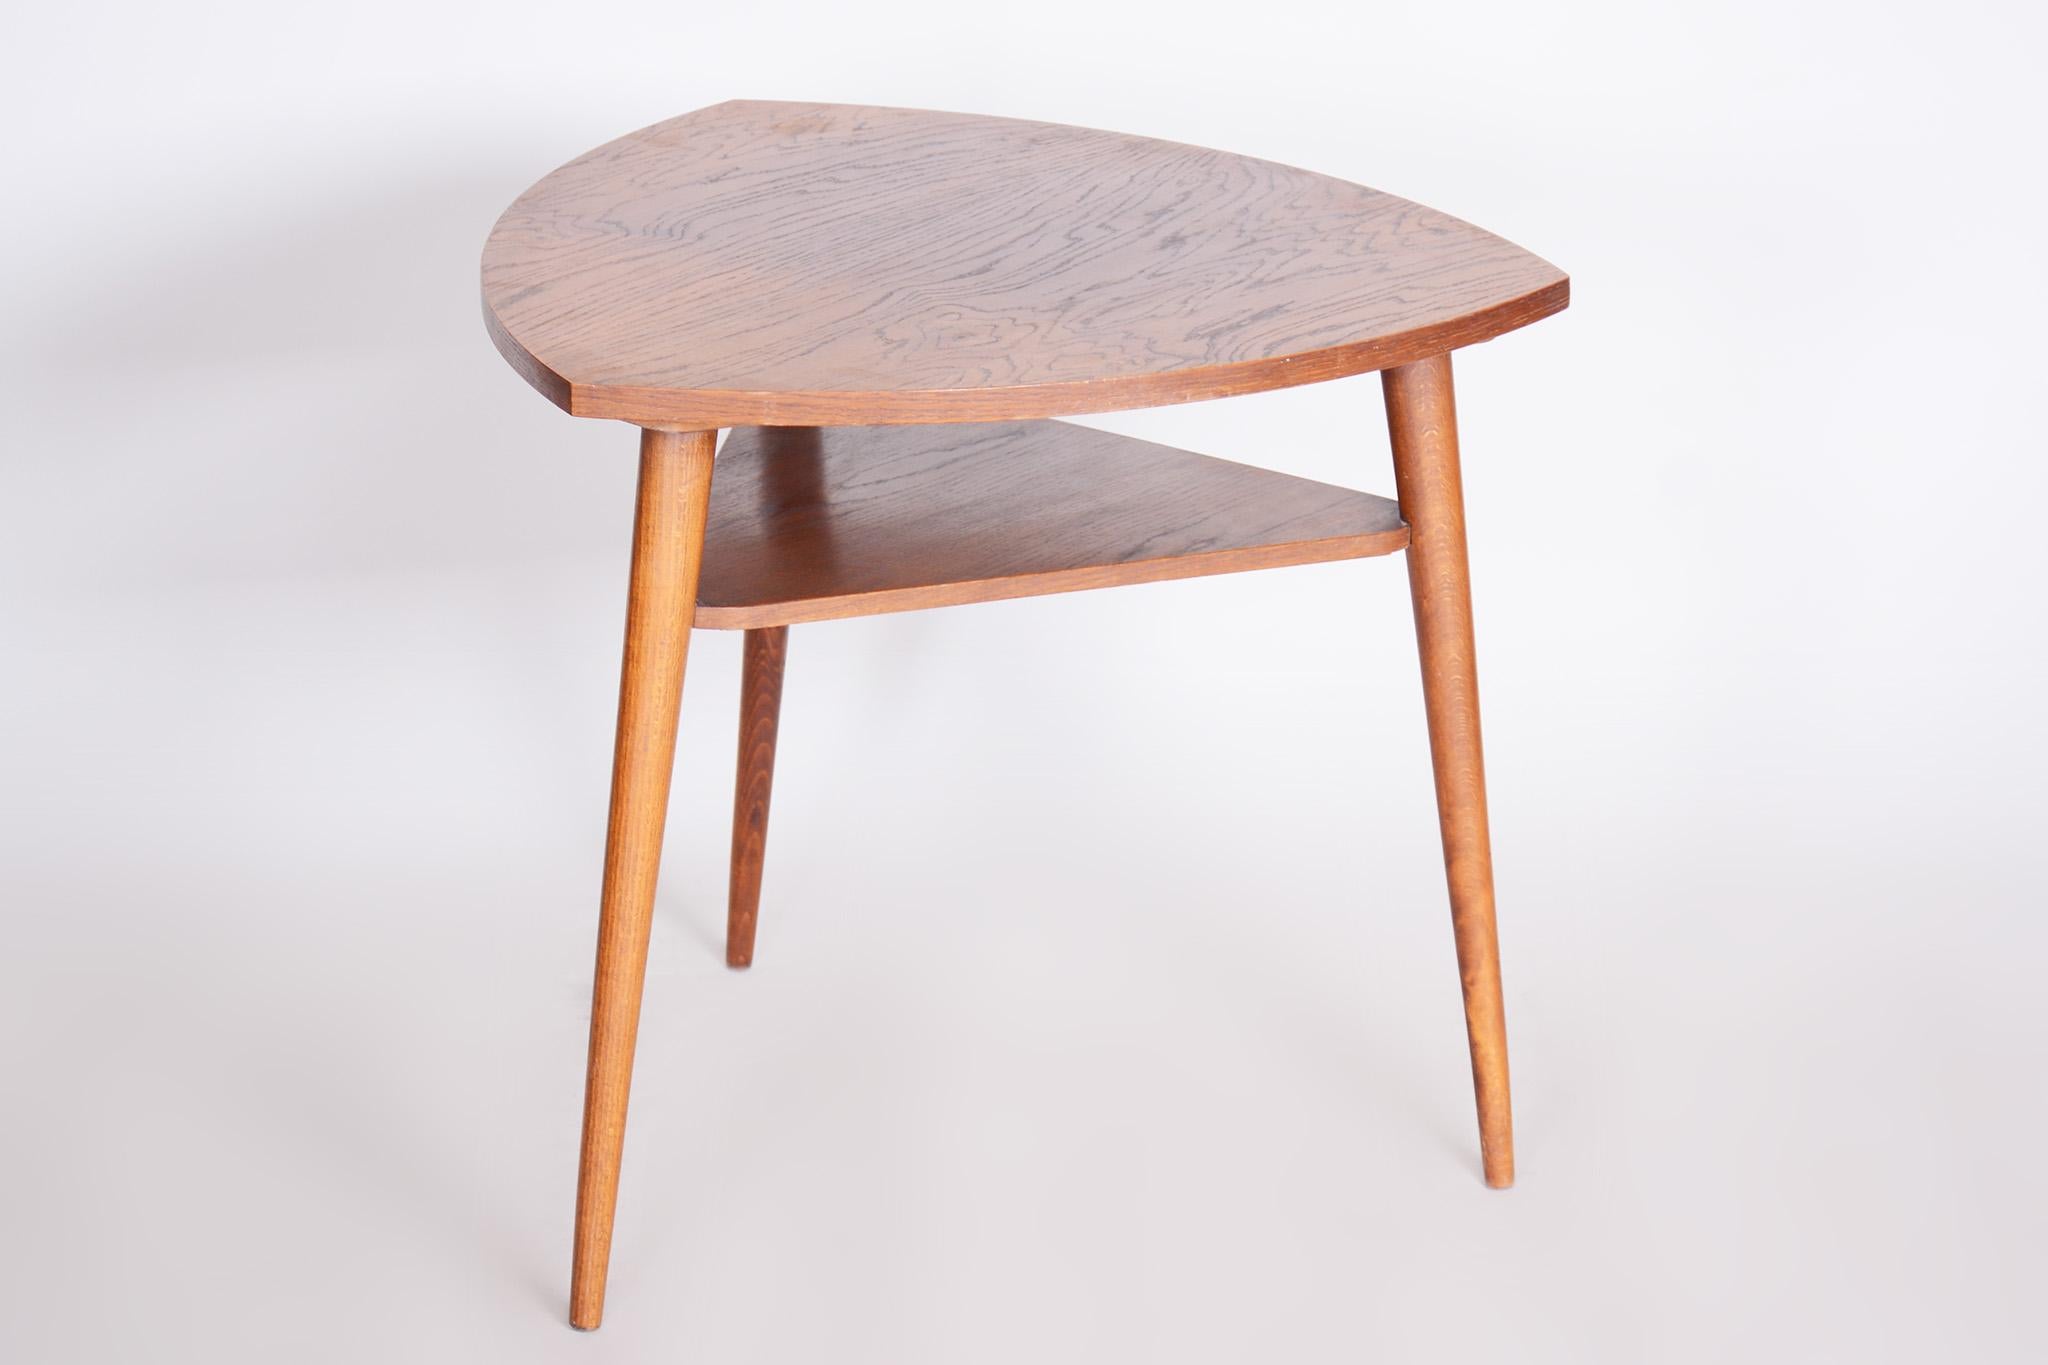 Small Mid Century Table, Made in Czechia, 1950s, Original Condition, Oak For Sale 2